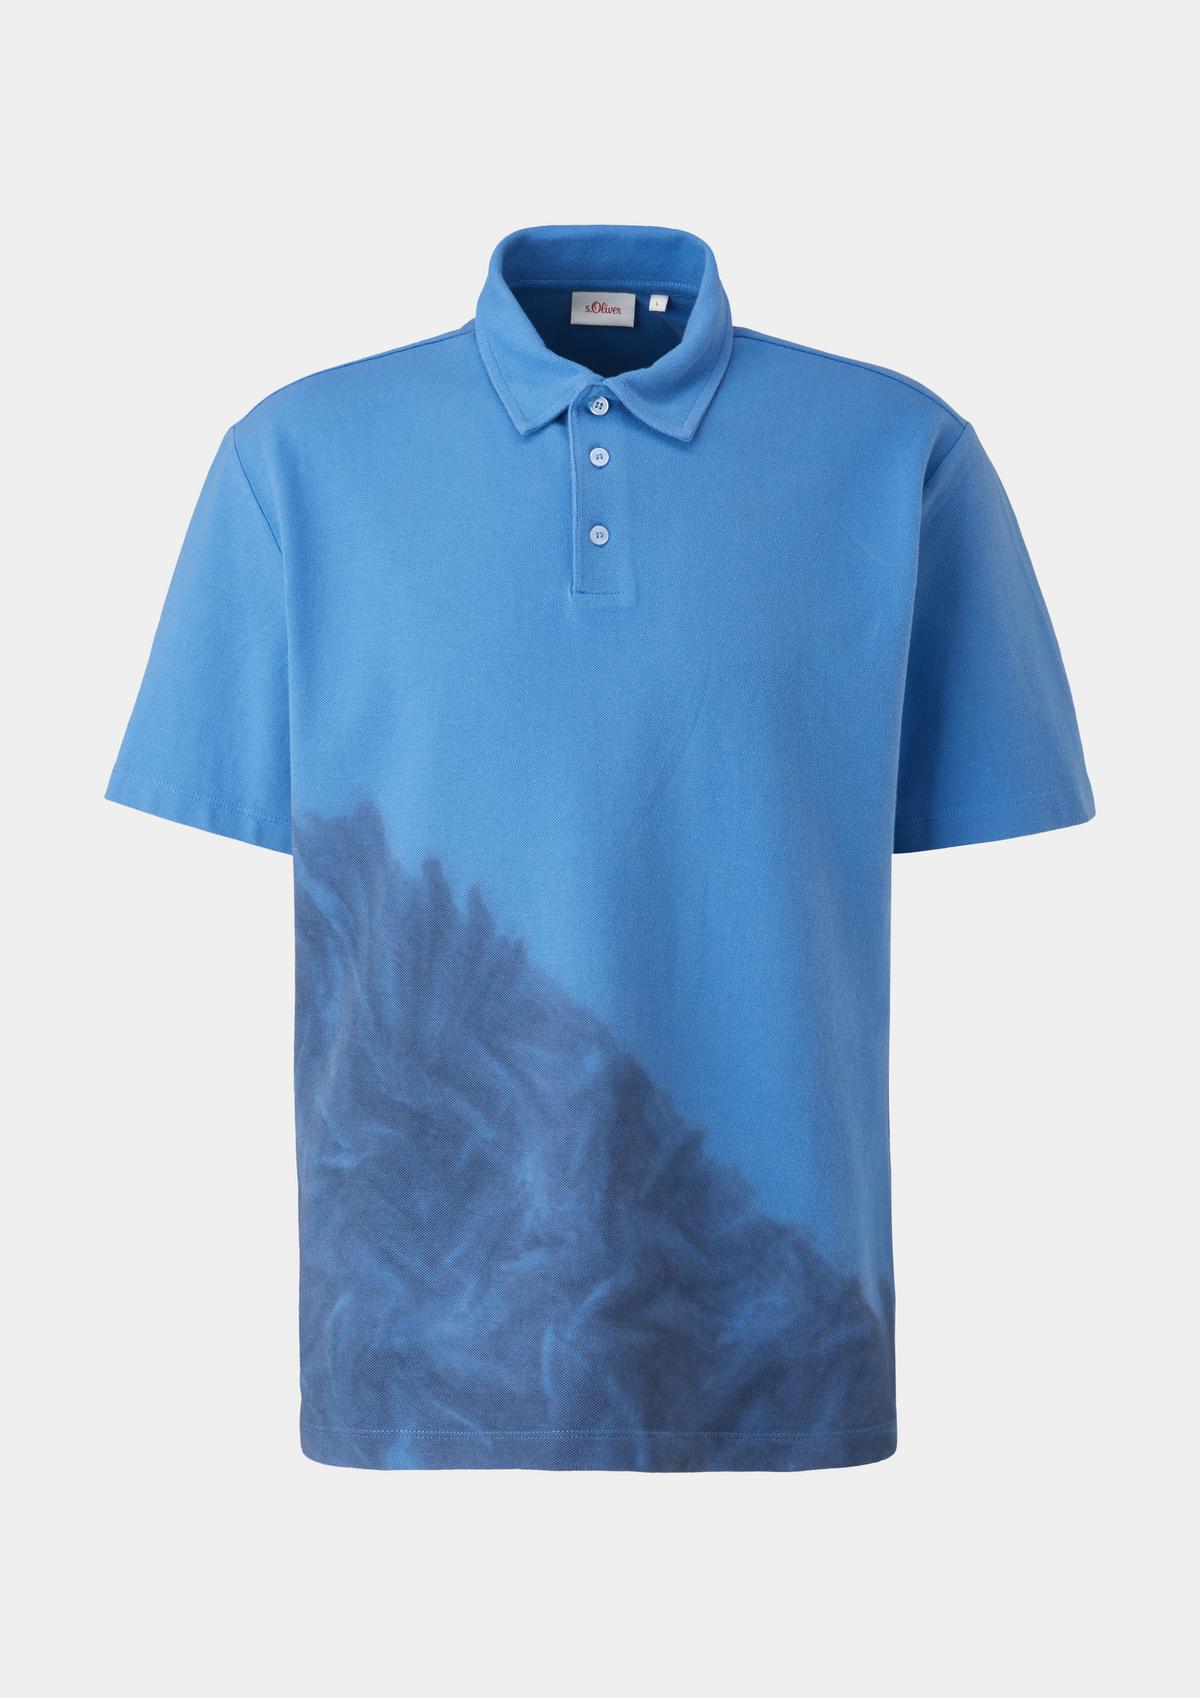 s.Oliver Polo shirt in a stunning design